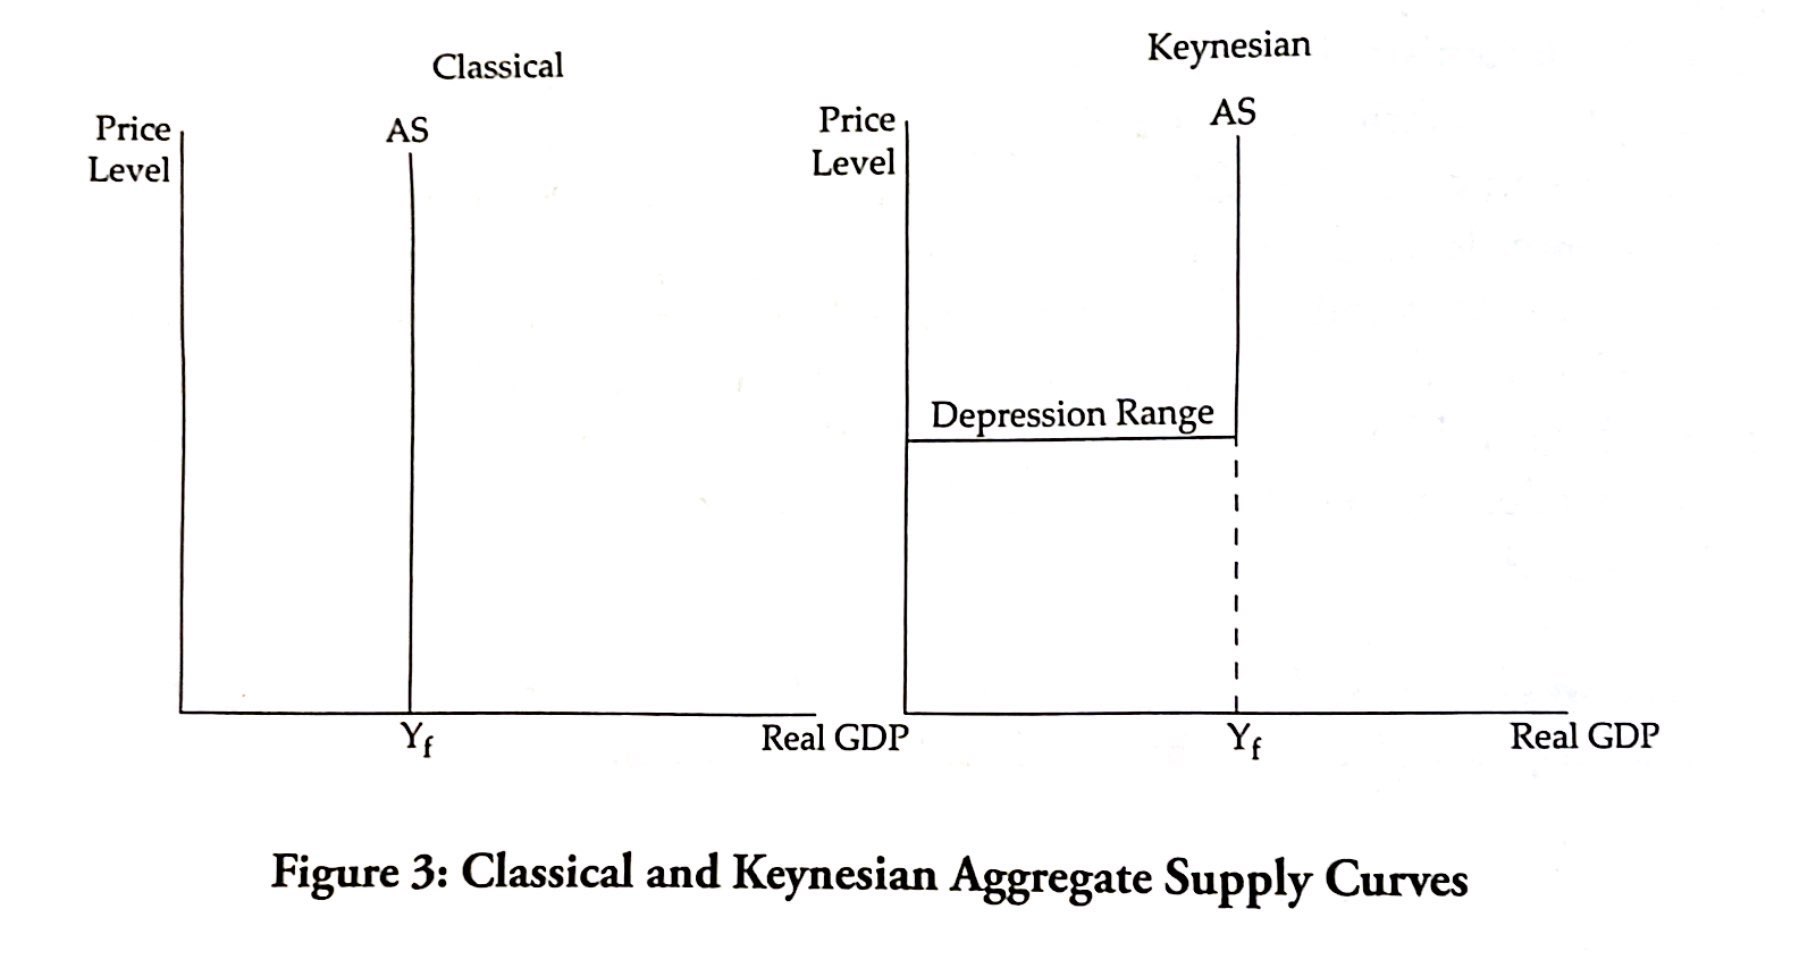 Figure 3: Classical and Keynesian Aggregate Supply Curves